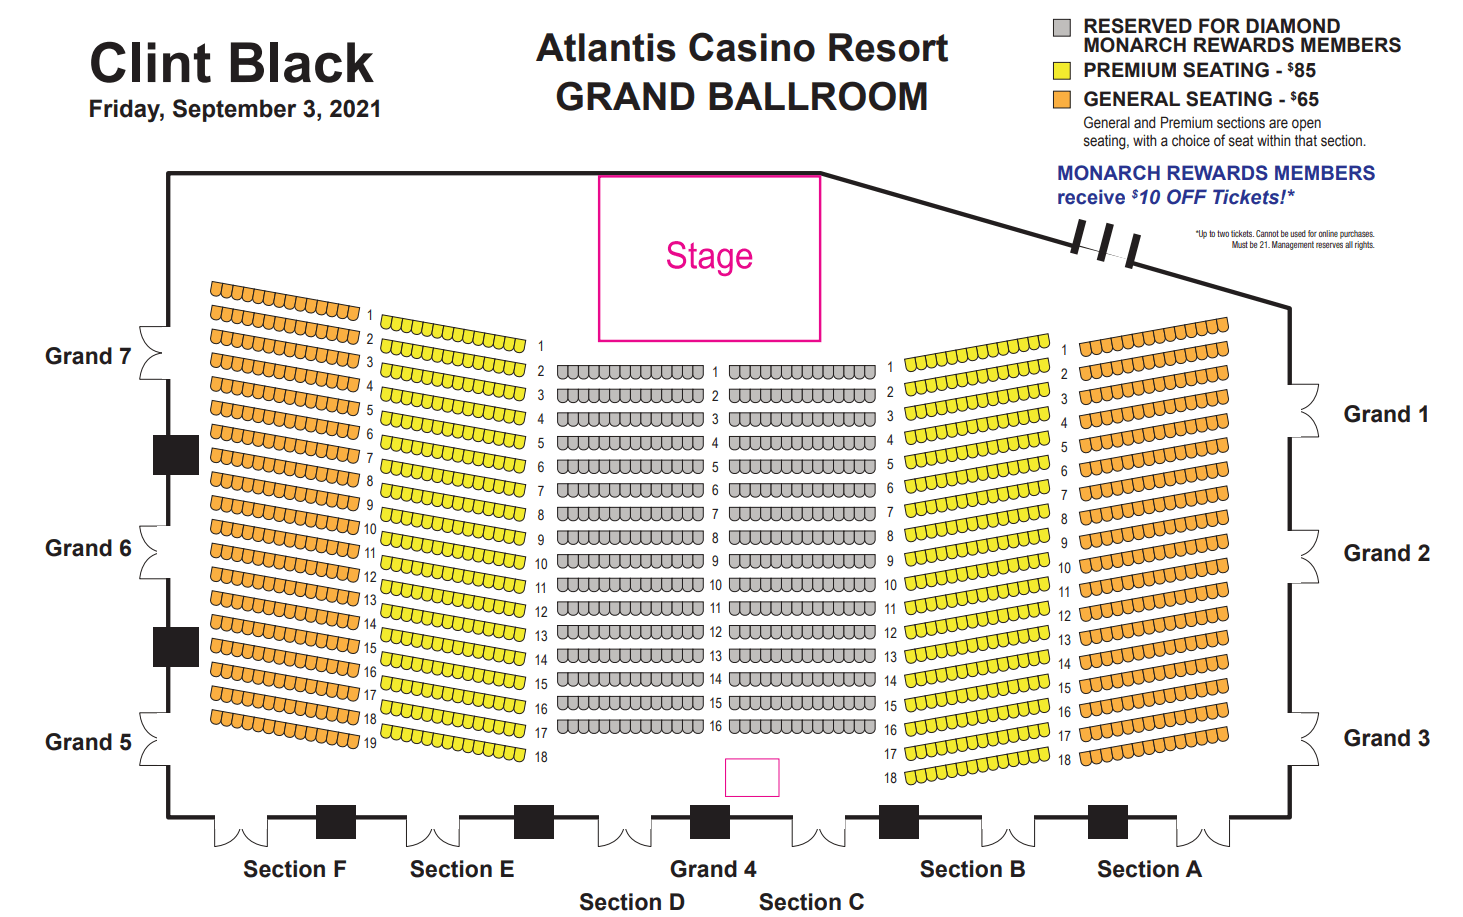 Seating Chart for Clint Black